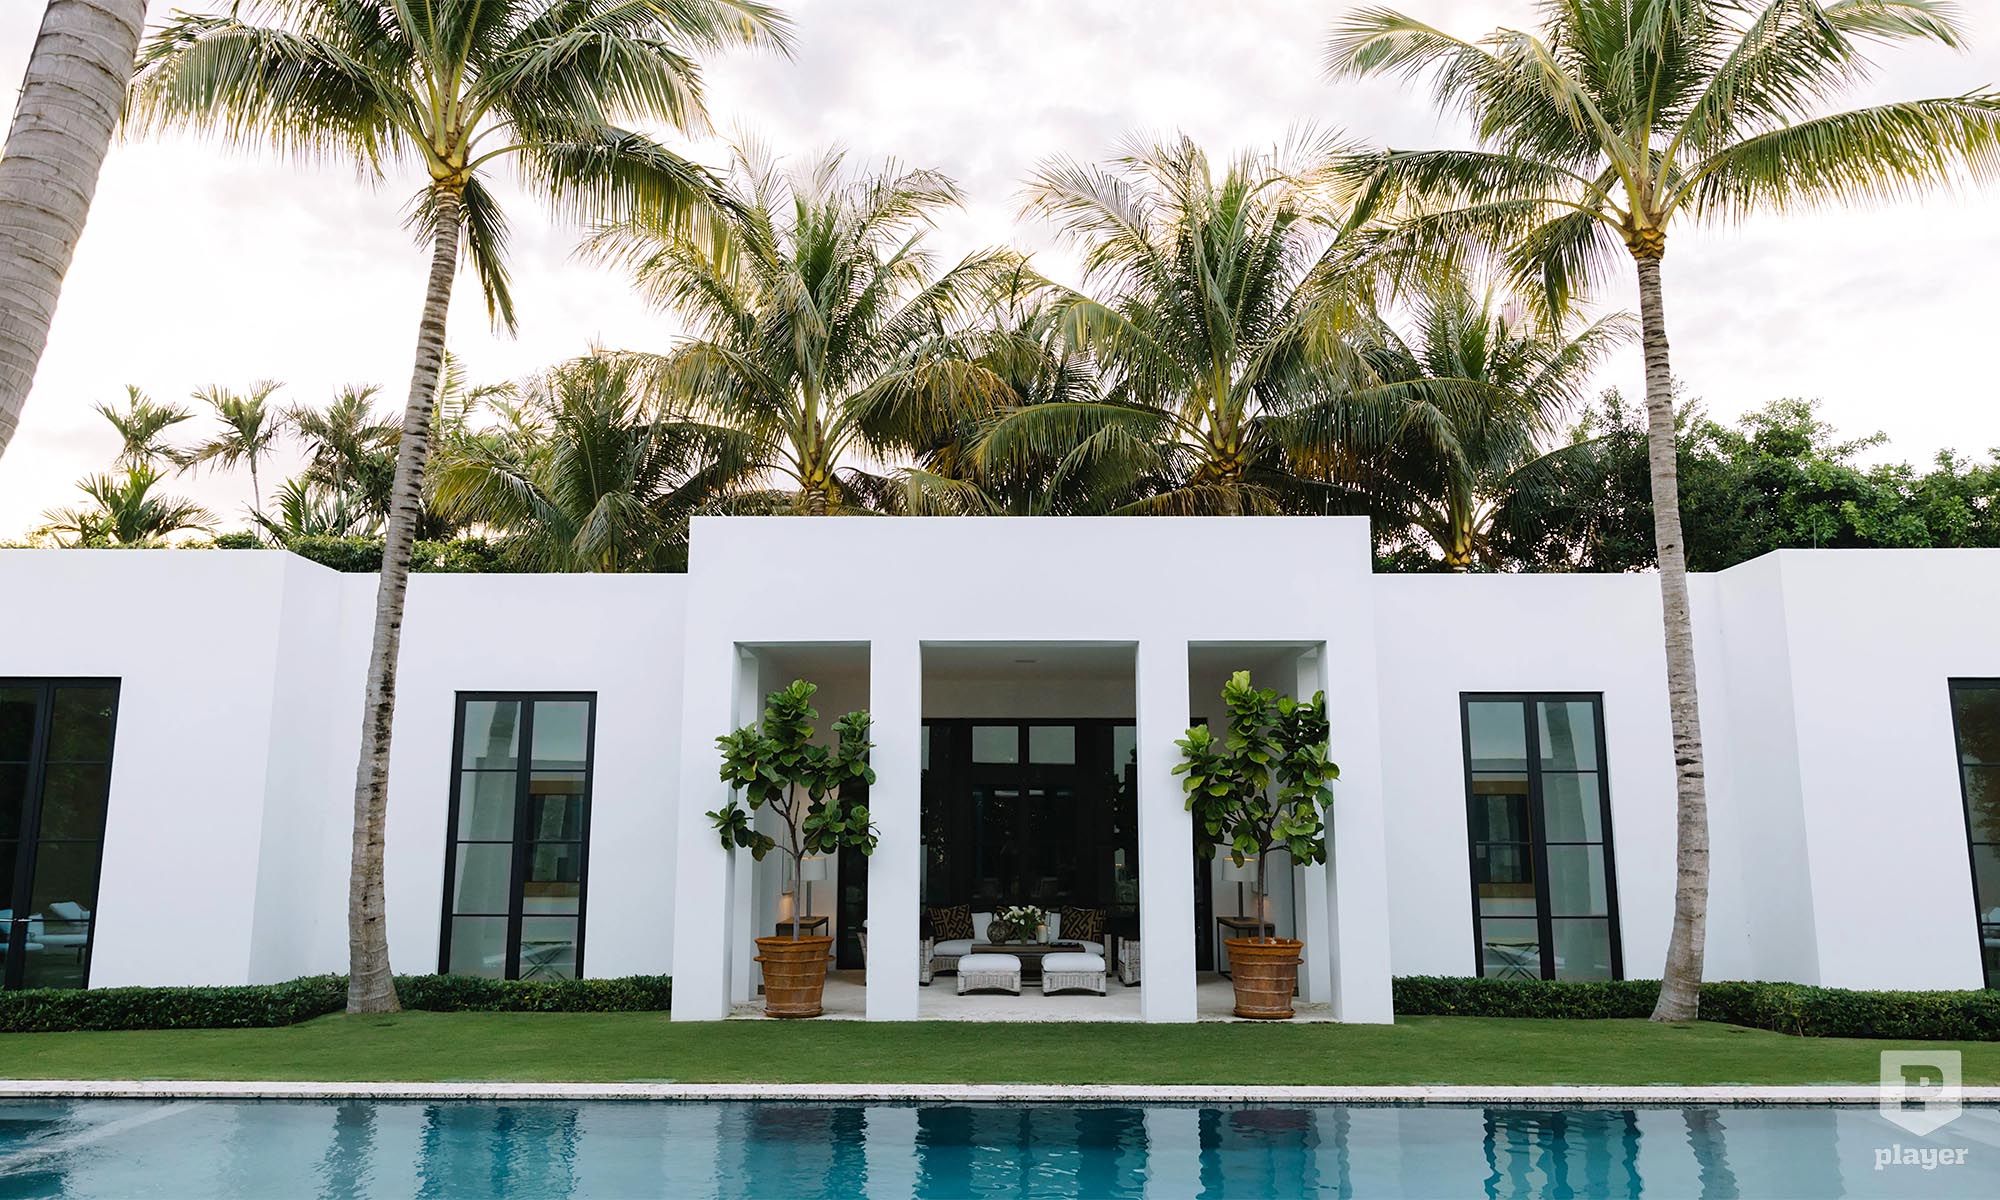 PHOTOS: Tom Ford's real estate deals in Palm Beach